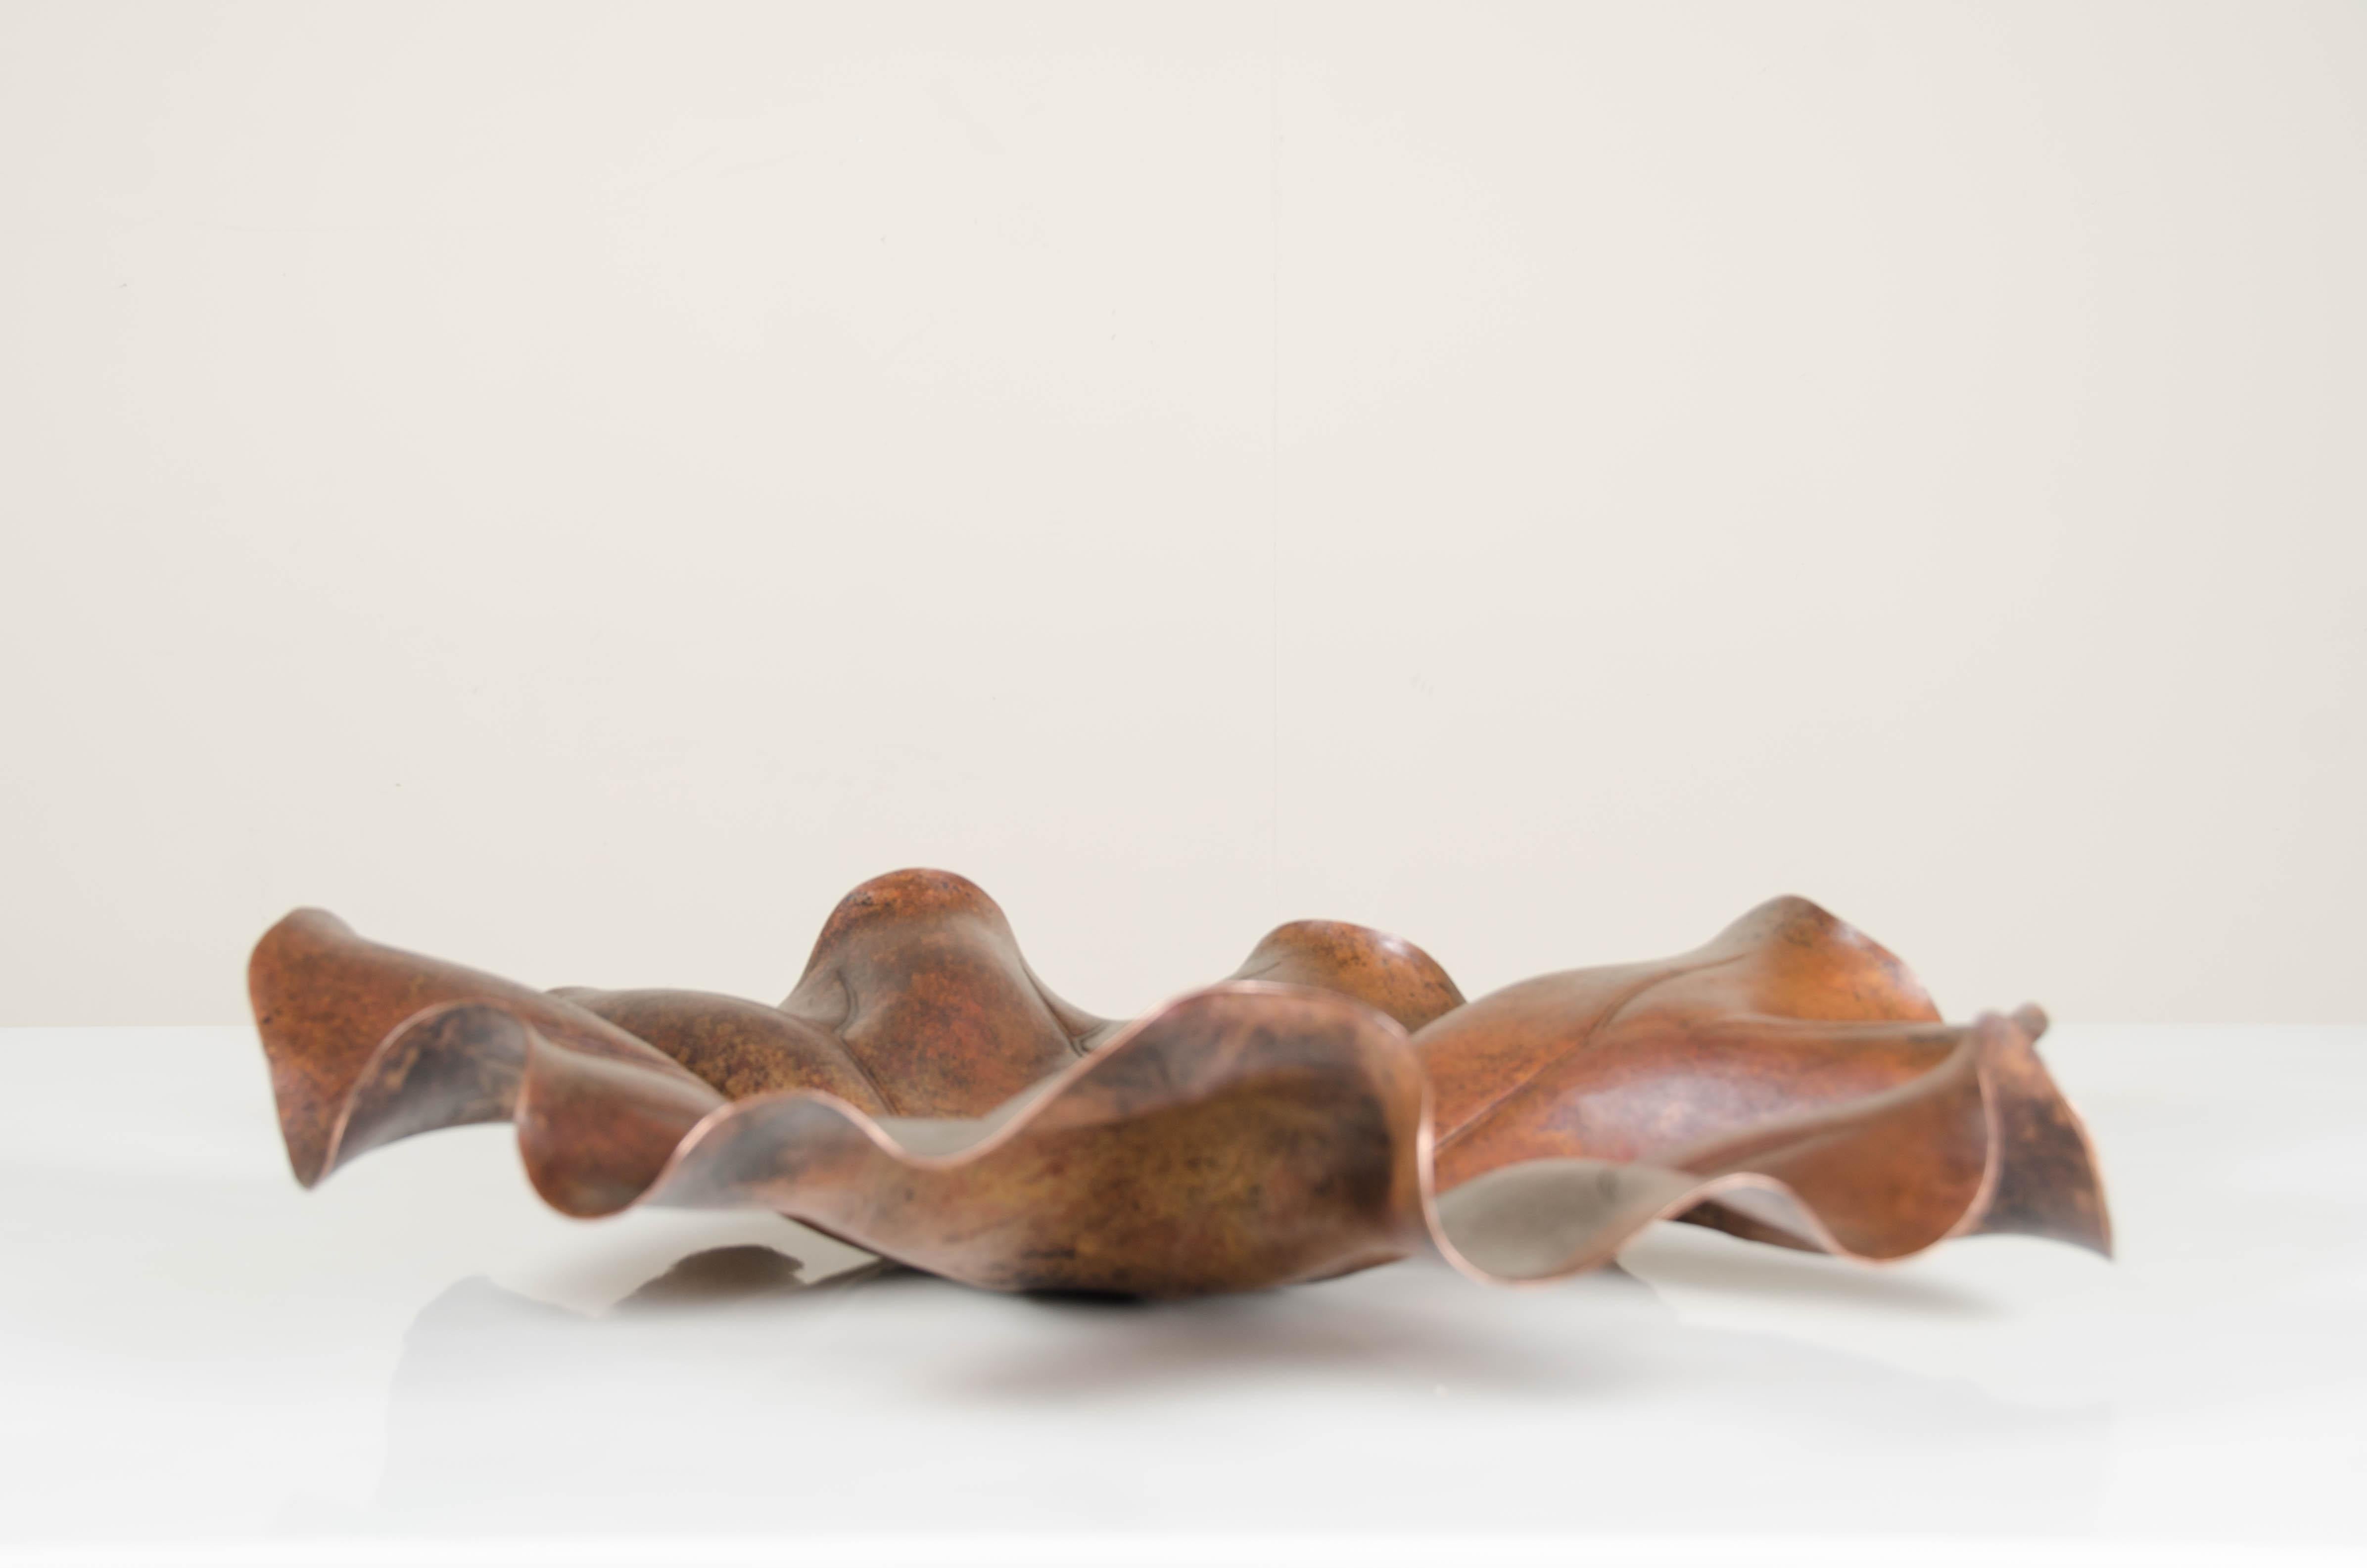 Contemporary Lotus Leaf Plate, Antique Copper by Robert Kuo, Hand Repoussé, Limited Edition For Sale